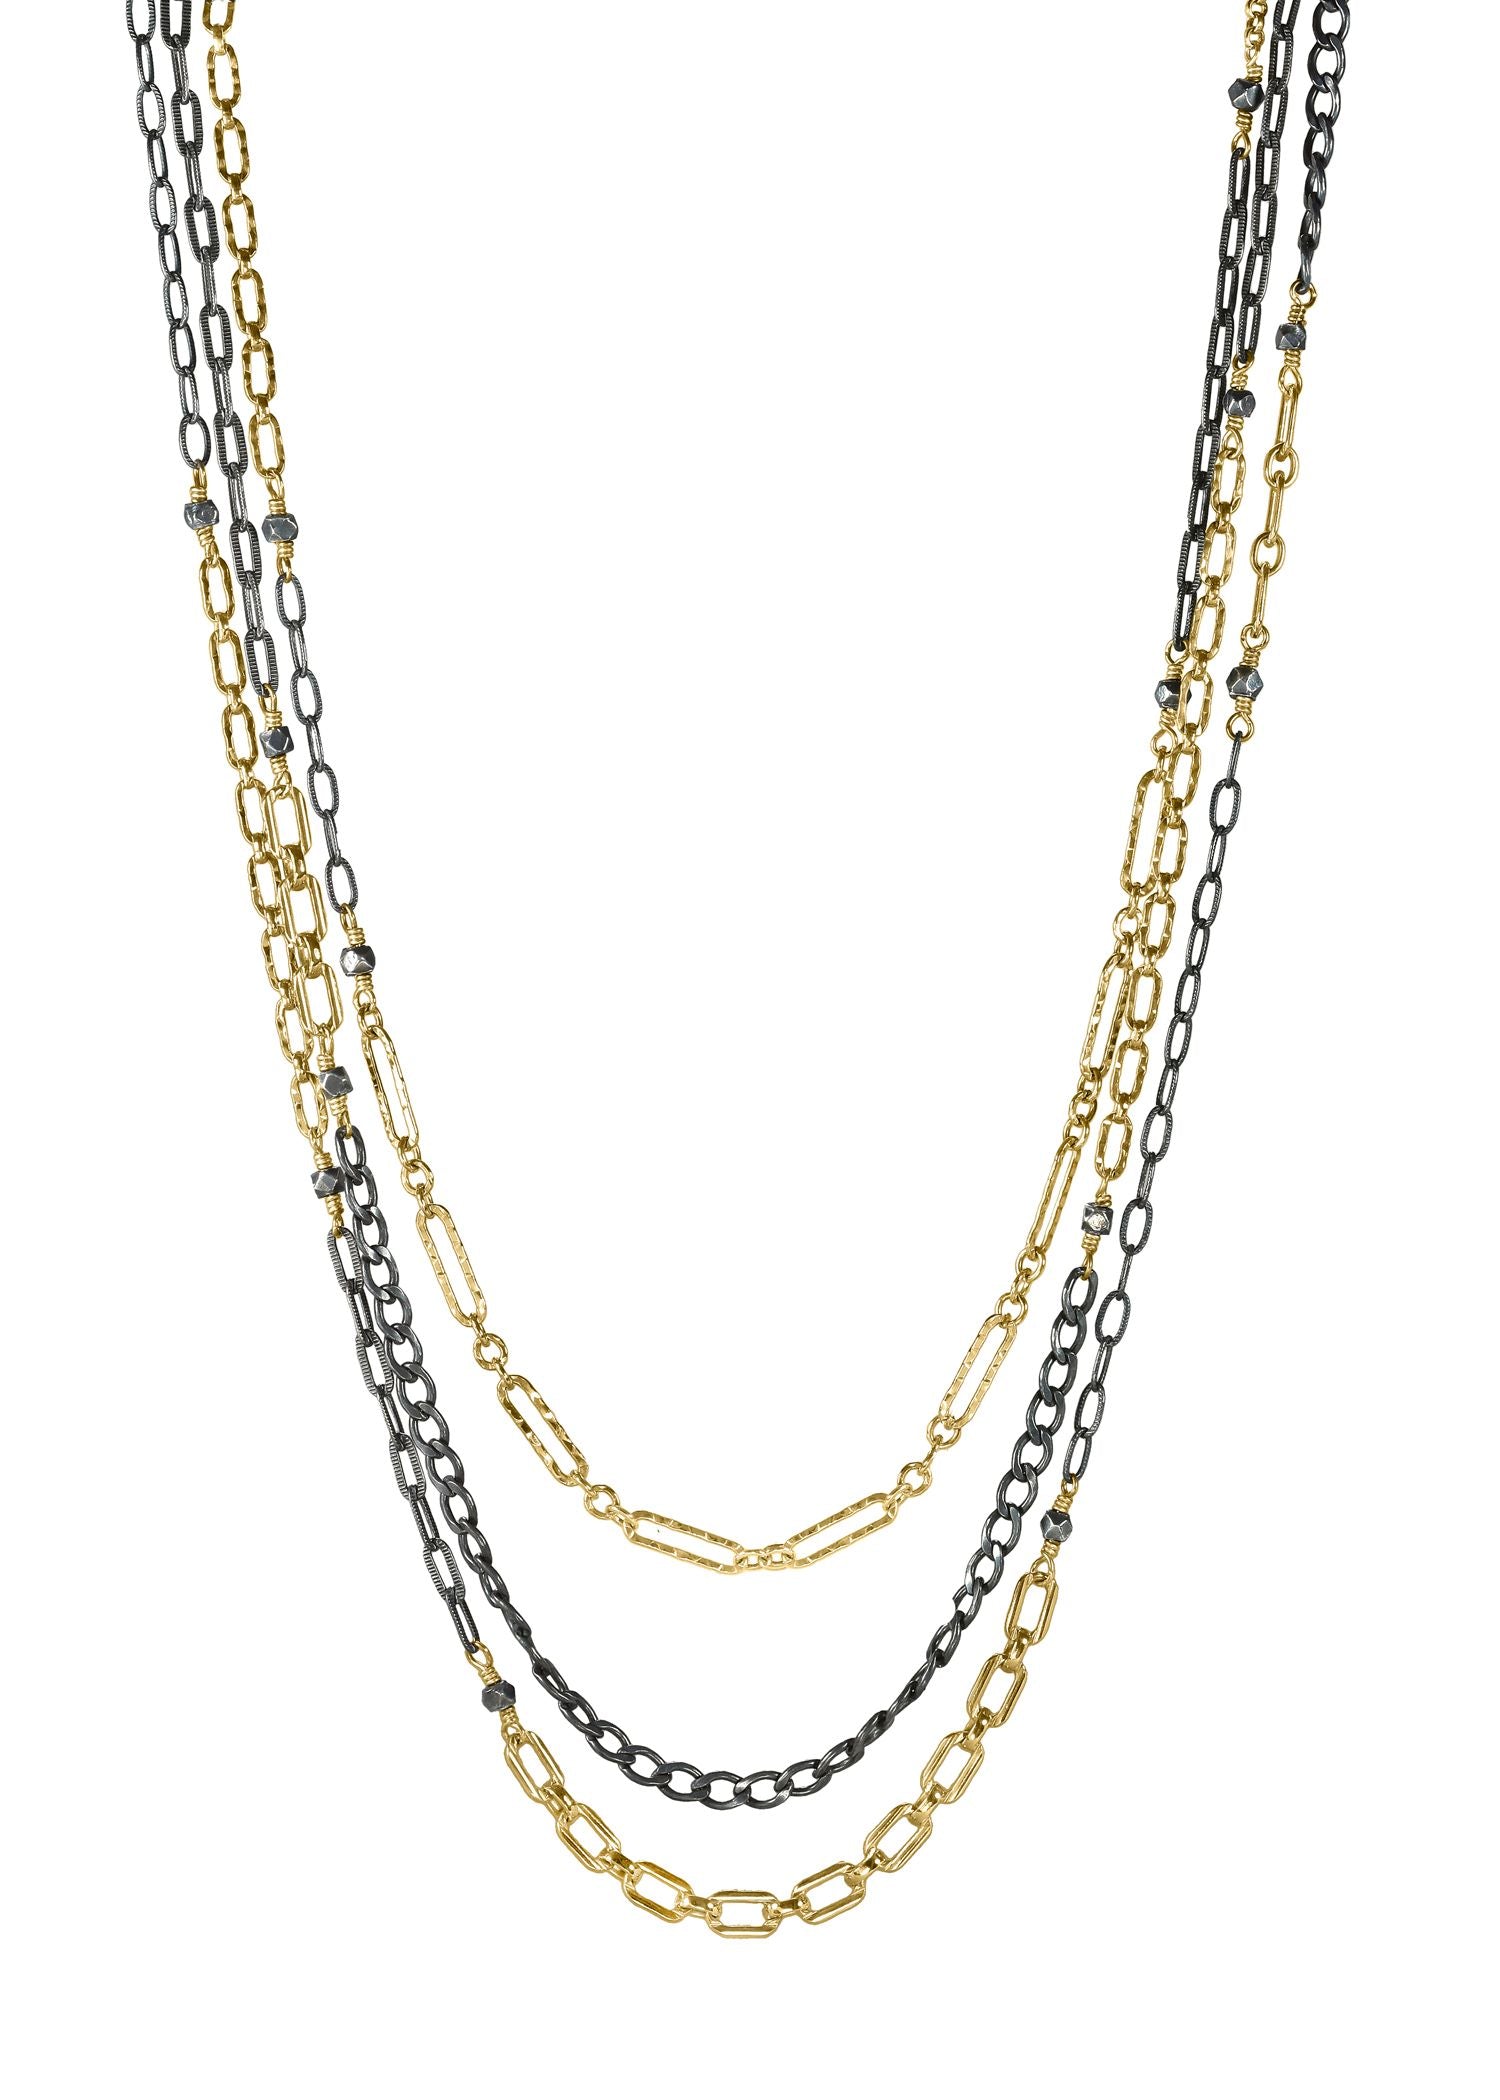 14k gold fill Blackened sterling silver Mixed metal Necklace chains measure 14-1/2”, 15-1/2” and 16-1/4” in length 14-1/2" (inner) 15-1/2" (middle) 16-1/4" (outer) Handmade in our Los Angeles studio